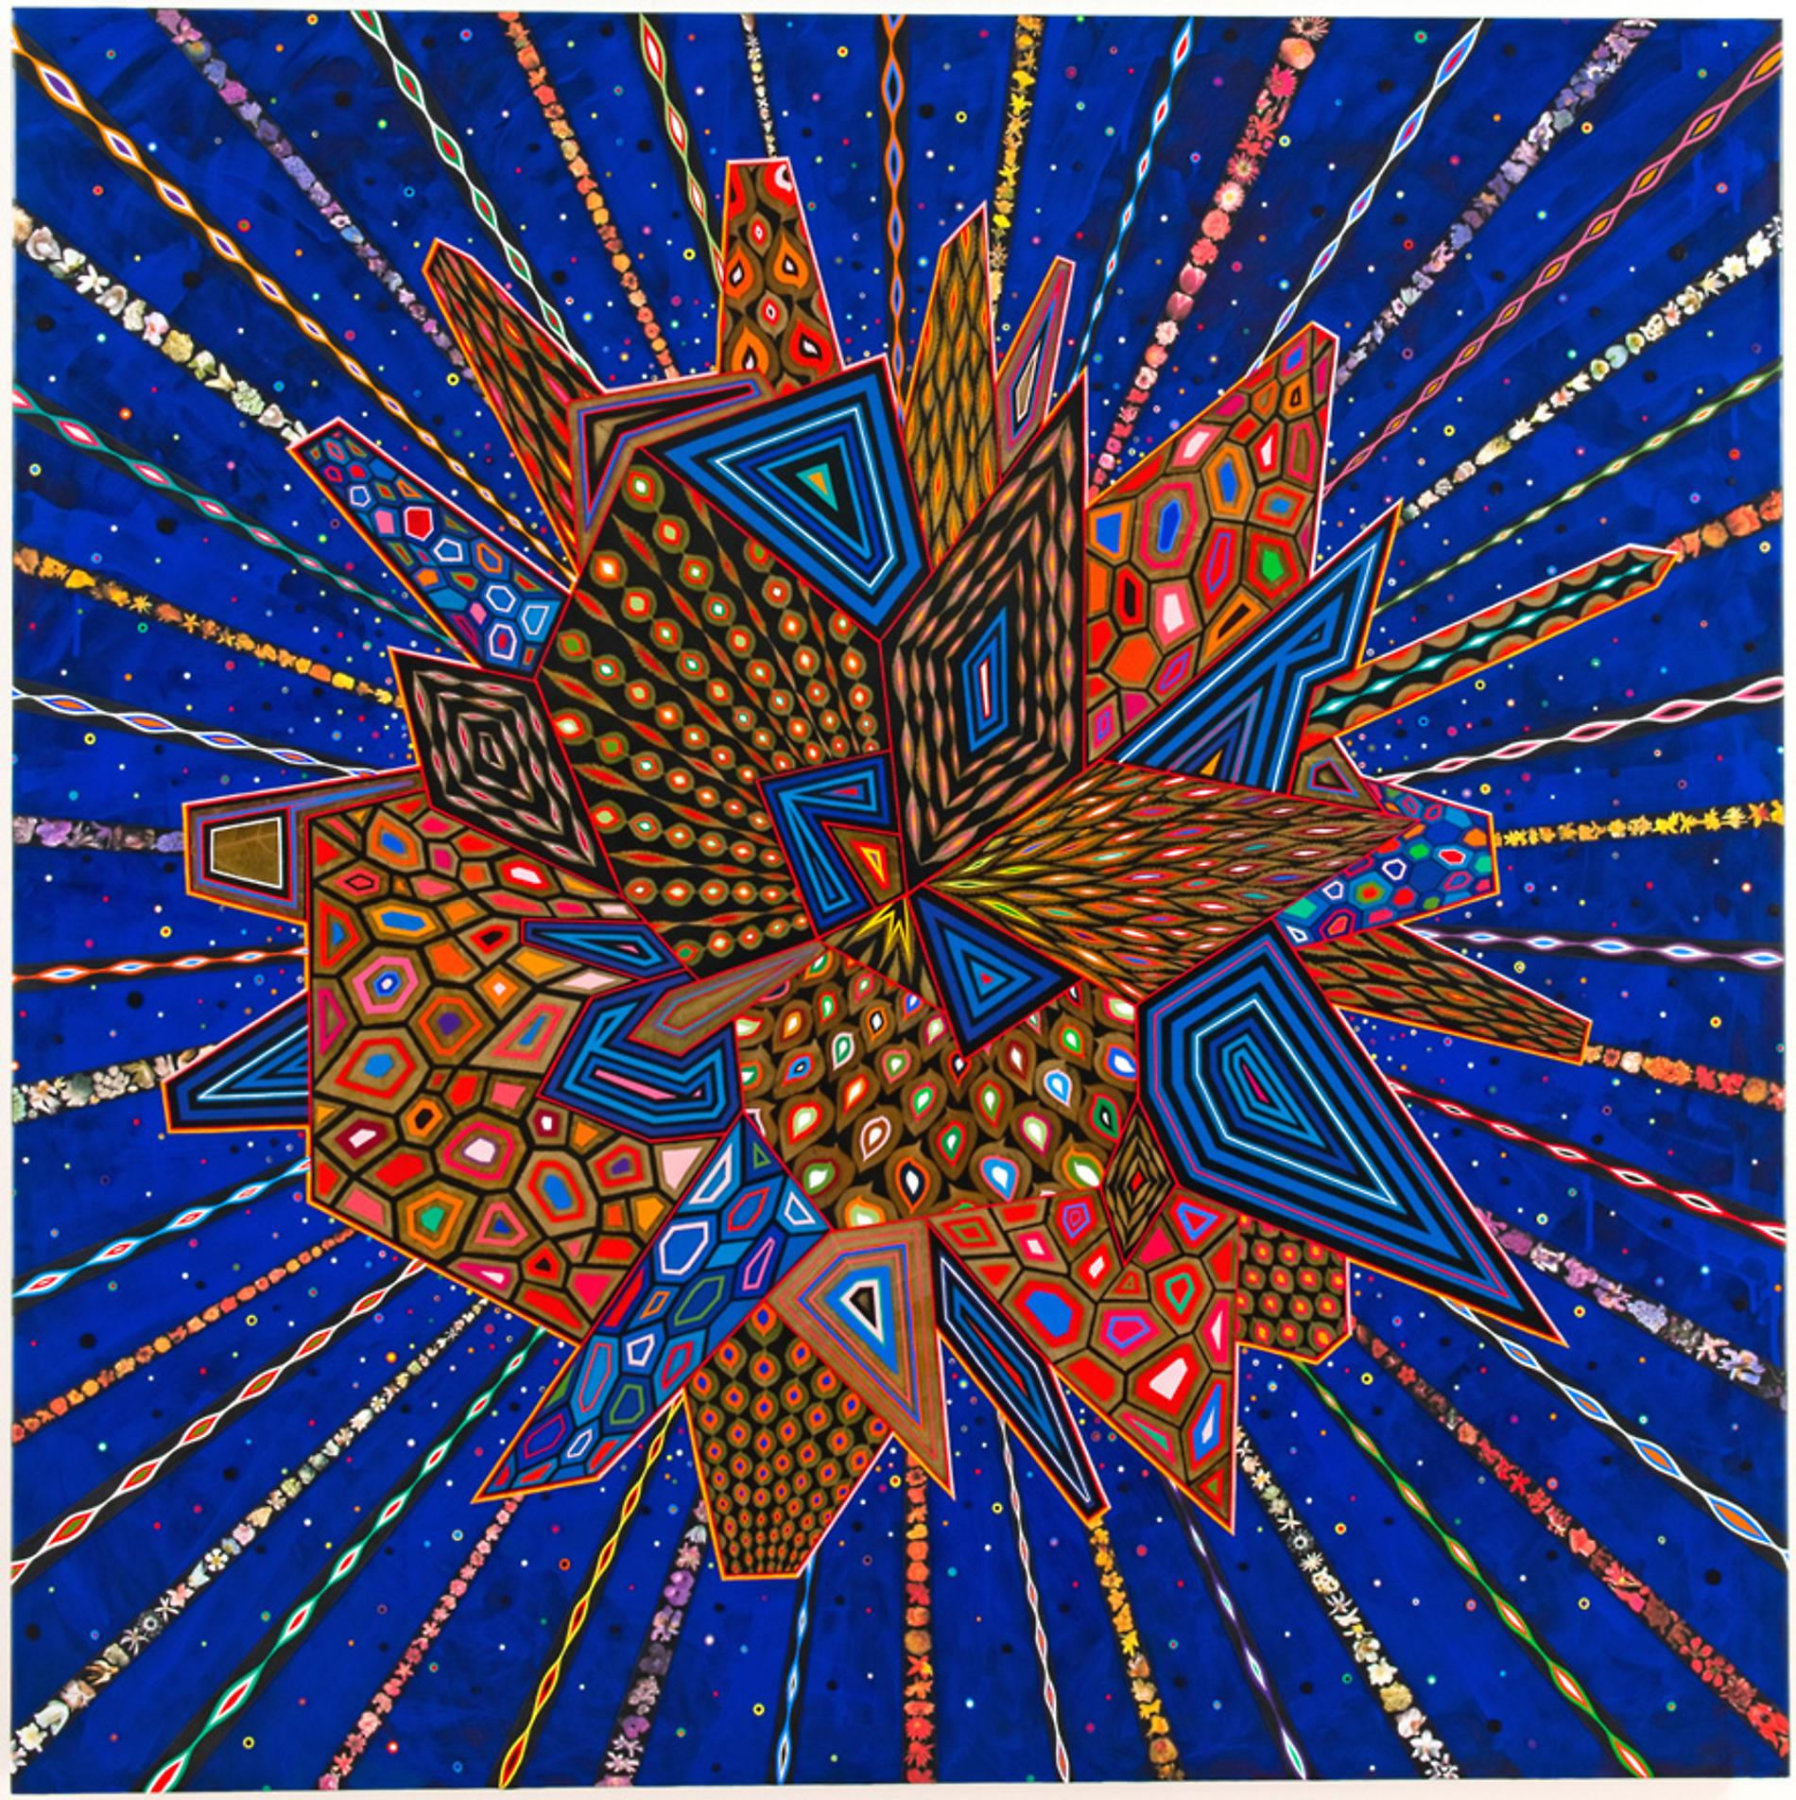 Image of FRED TOMASELLI's Untitled,&nbsp;2013